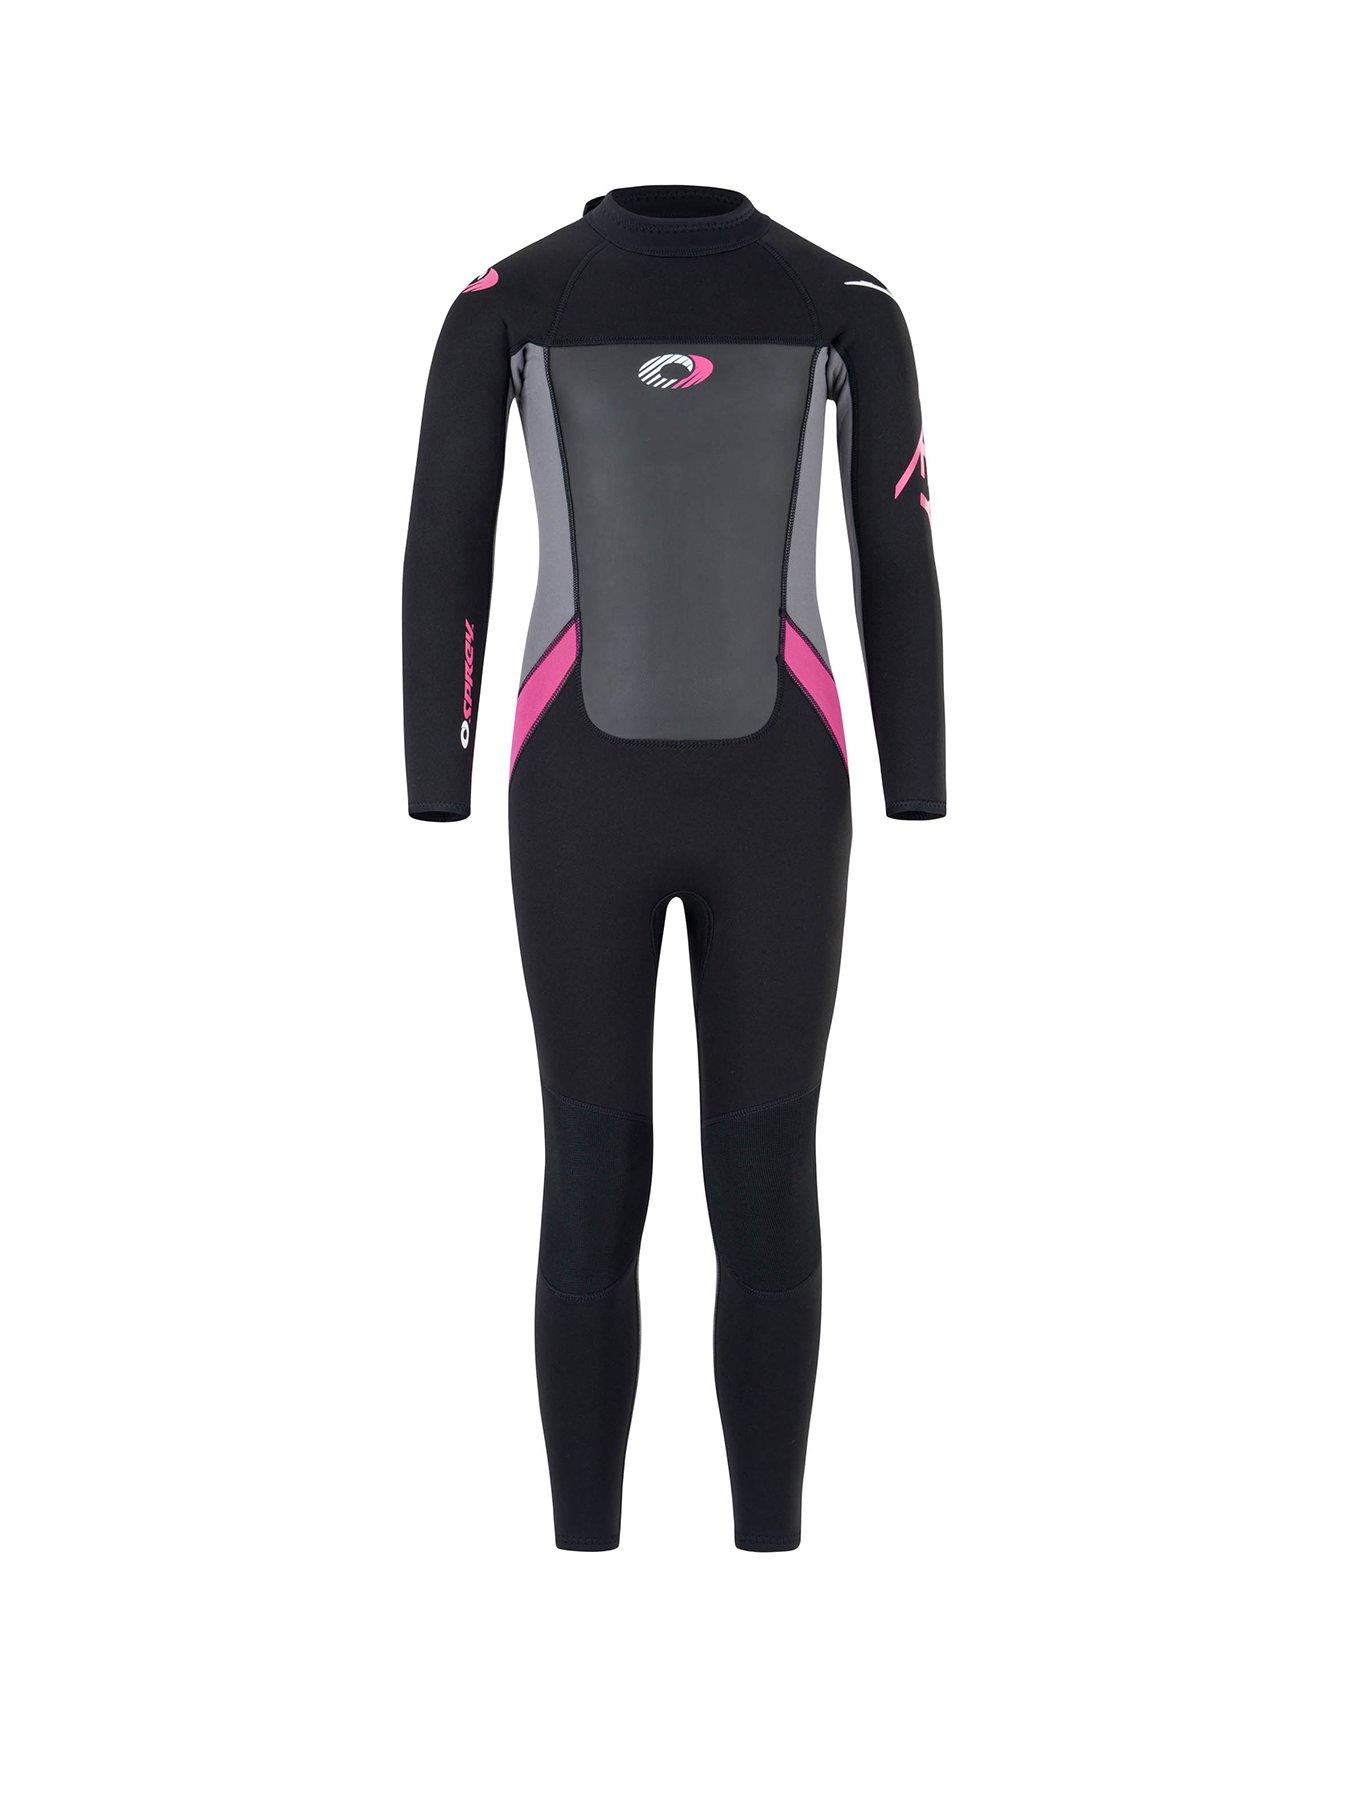 Sprey Soles Up Front Womans Full Length Wetsuit Ladies 3/2mm super stretch lightweight neoprene panels. 